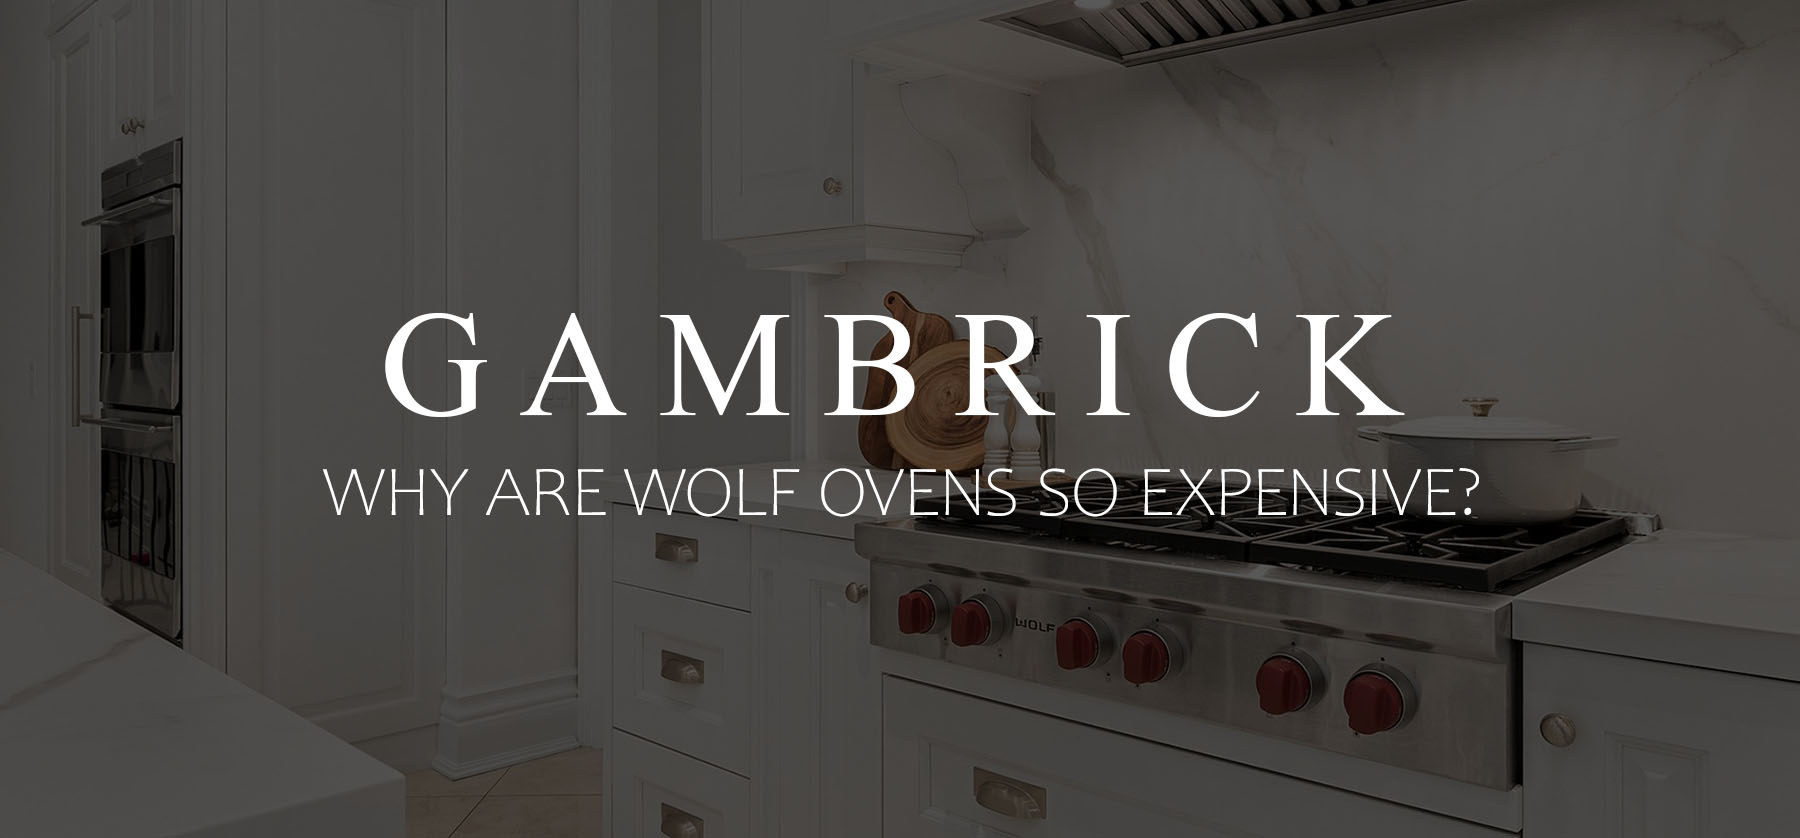 why are wolf ovens so expensive banner pic